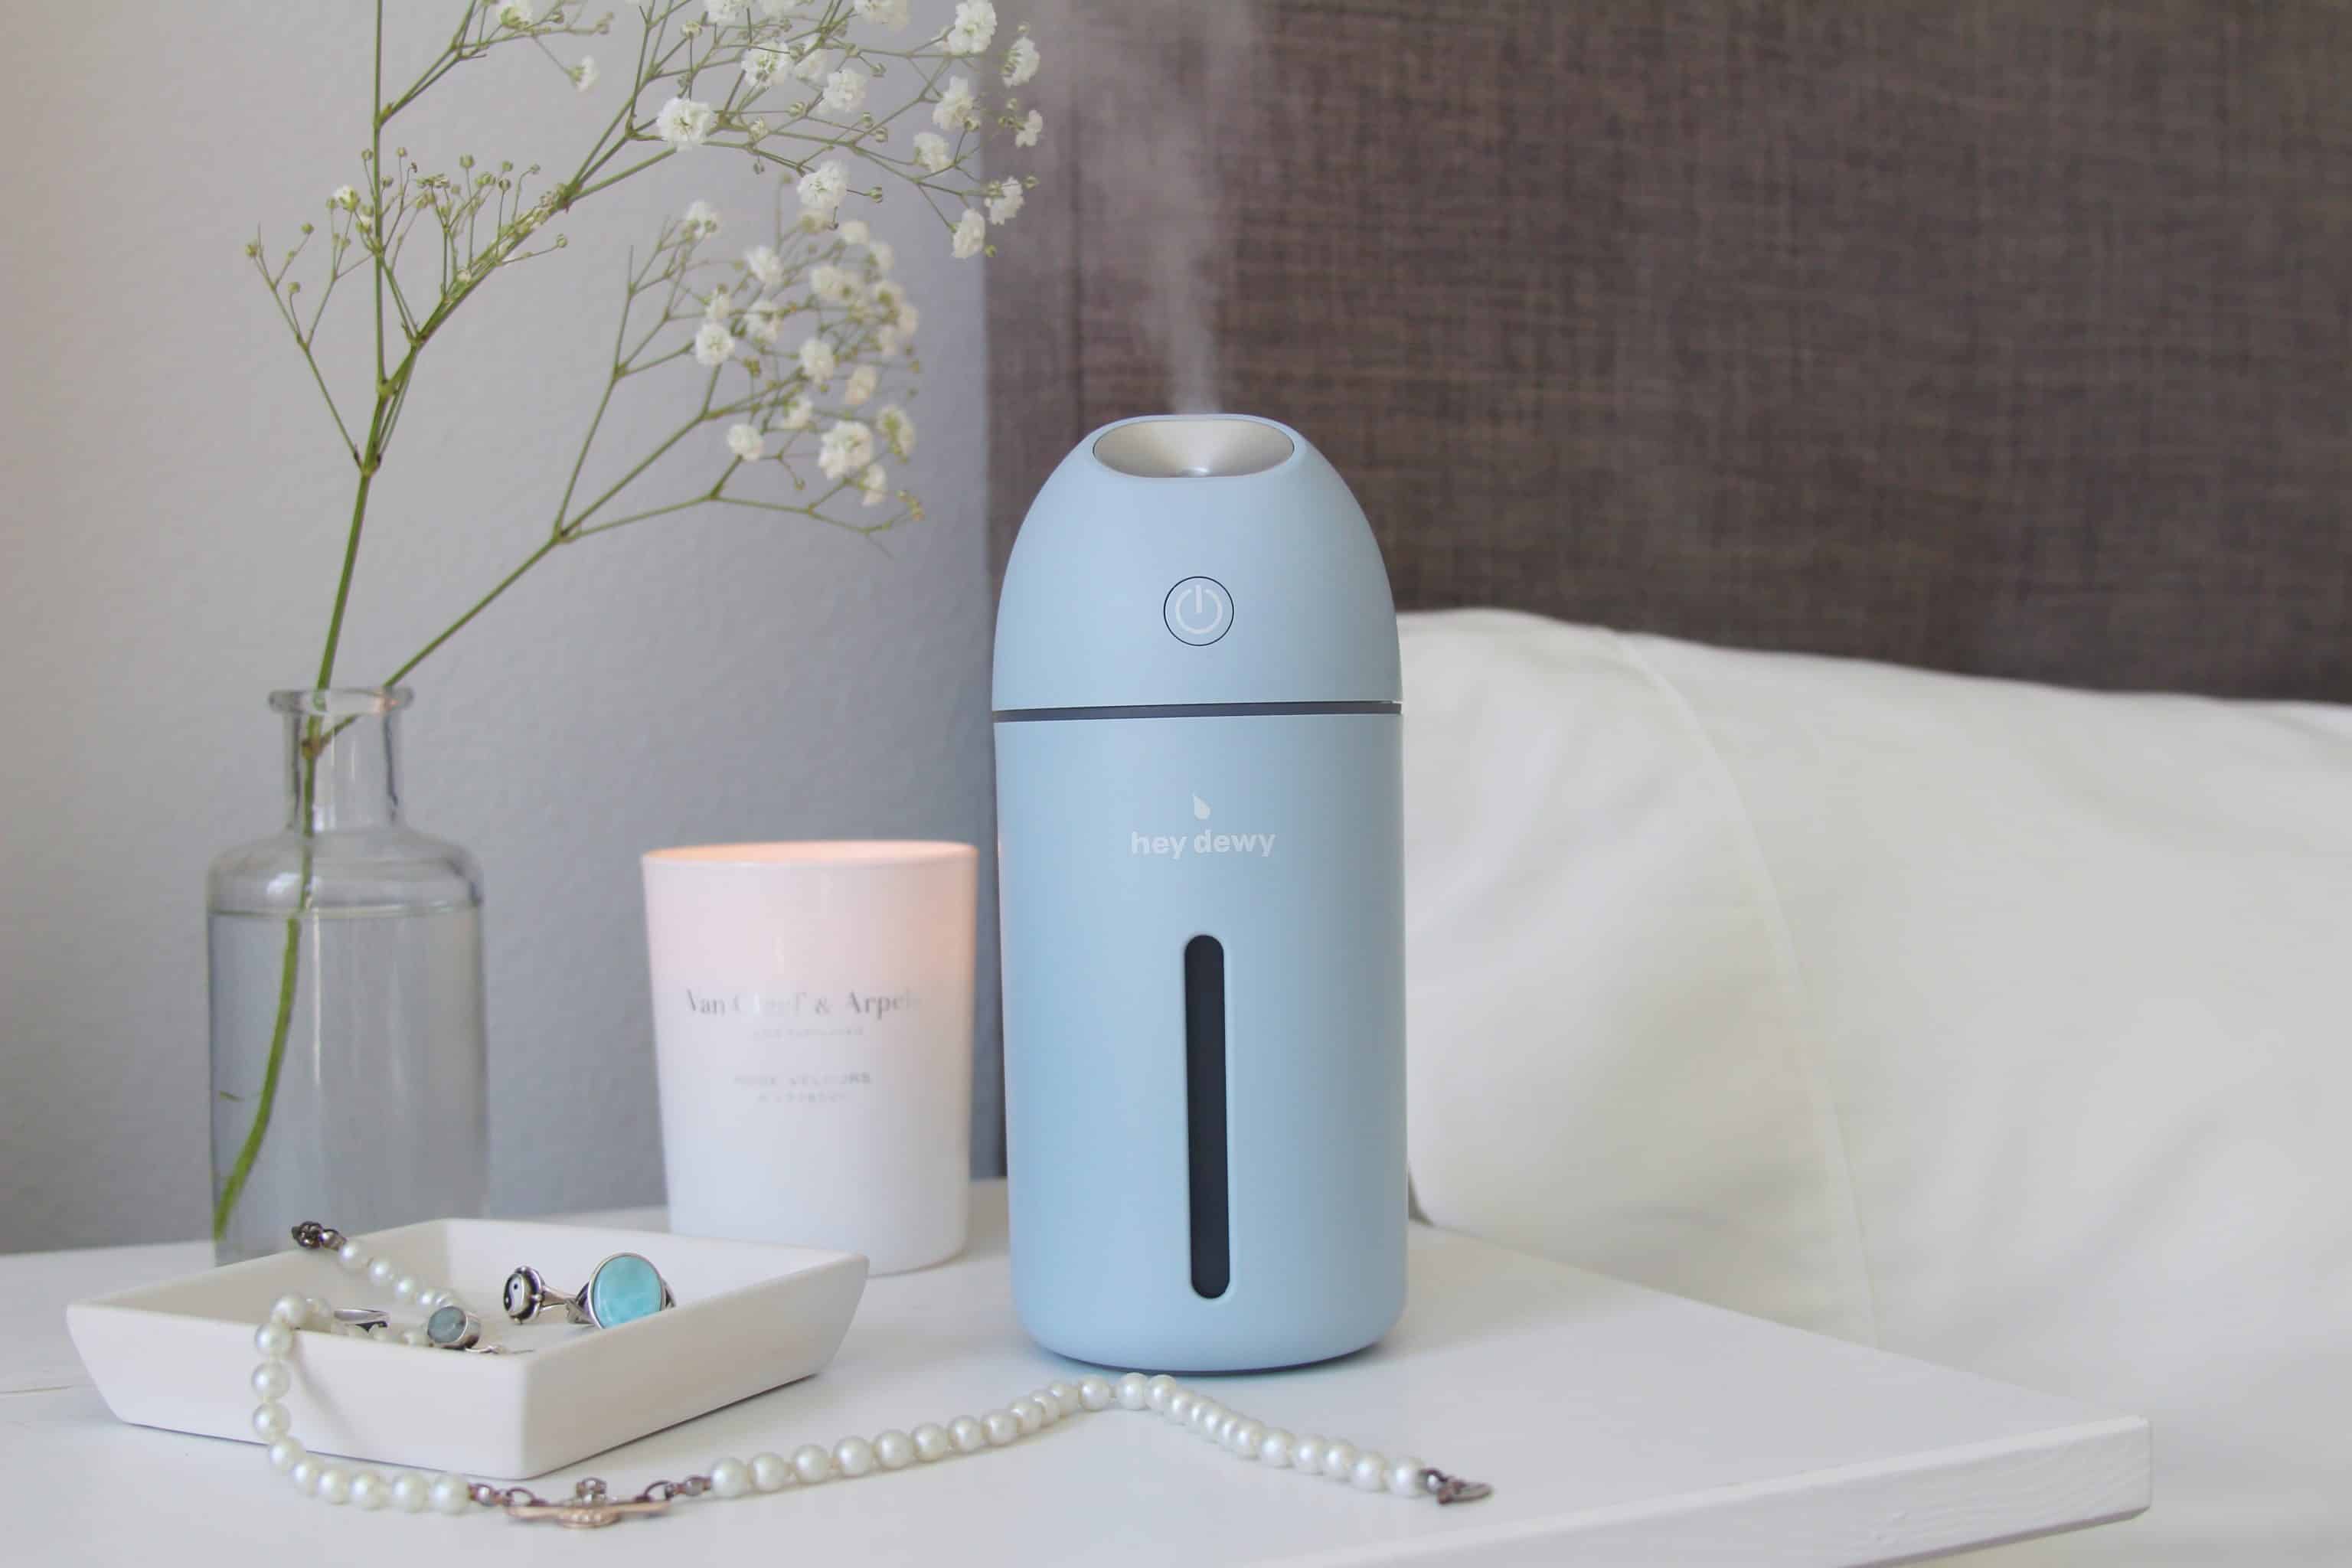 Vicks 3-in-1 Sleepy Time Ultrasonic Humidifier & Essential Oil Diffuser